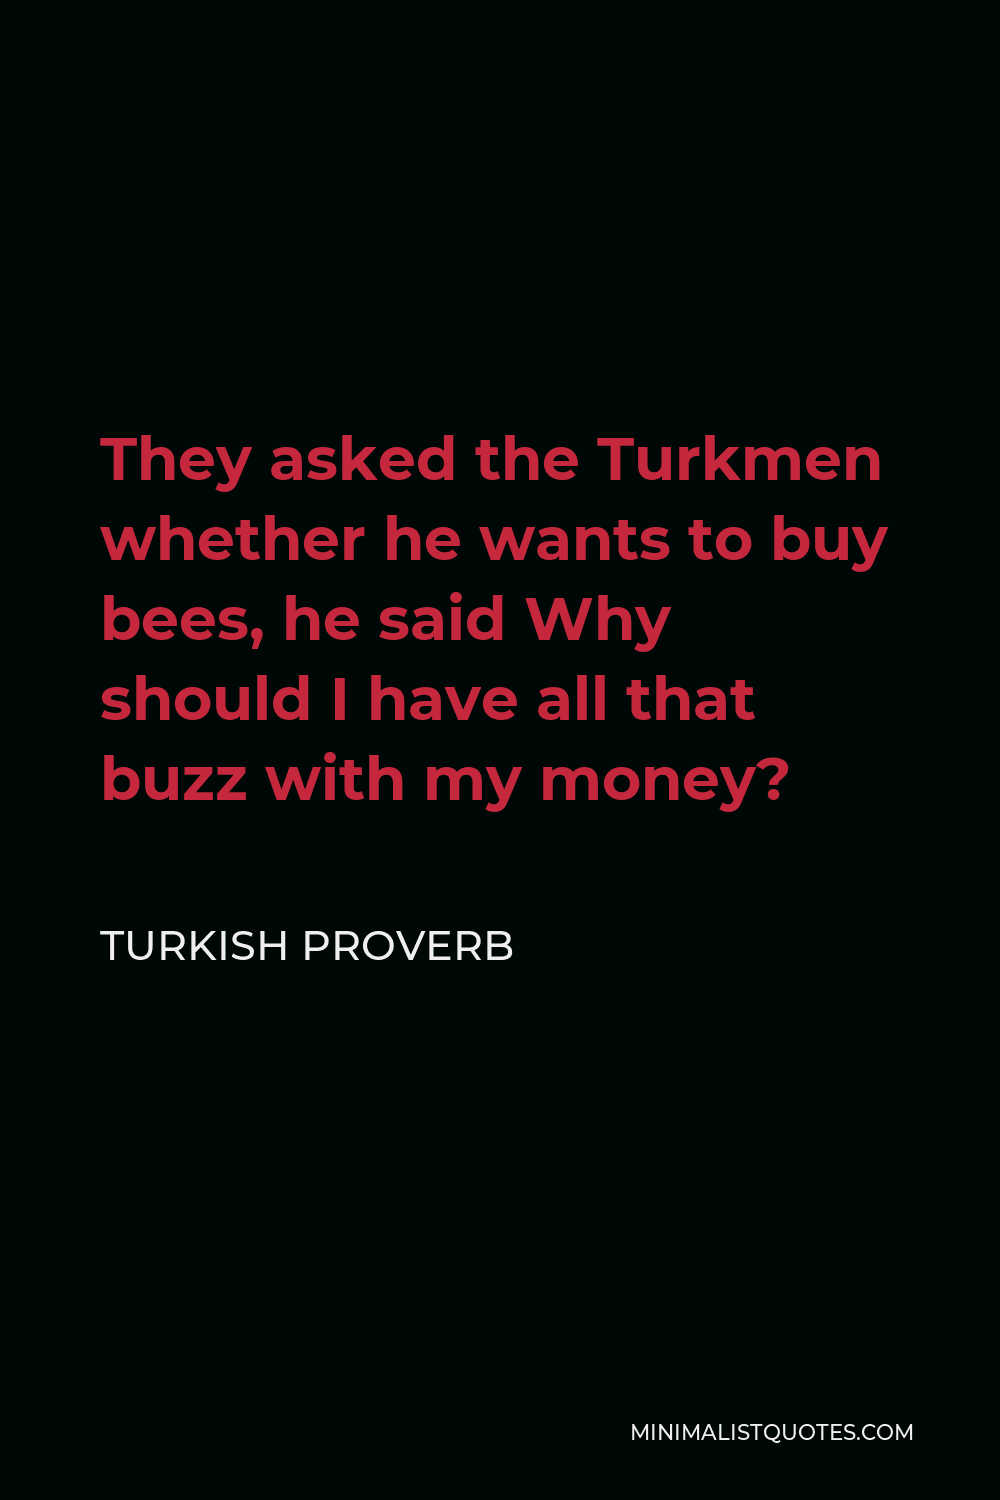 Turkish Proverb Quote - They asked the Turkmen whether he wants to buy bees, he said Why should I have all that buzz with my money?